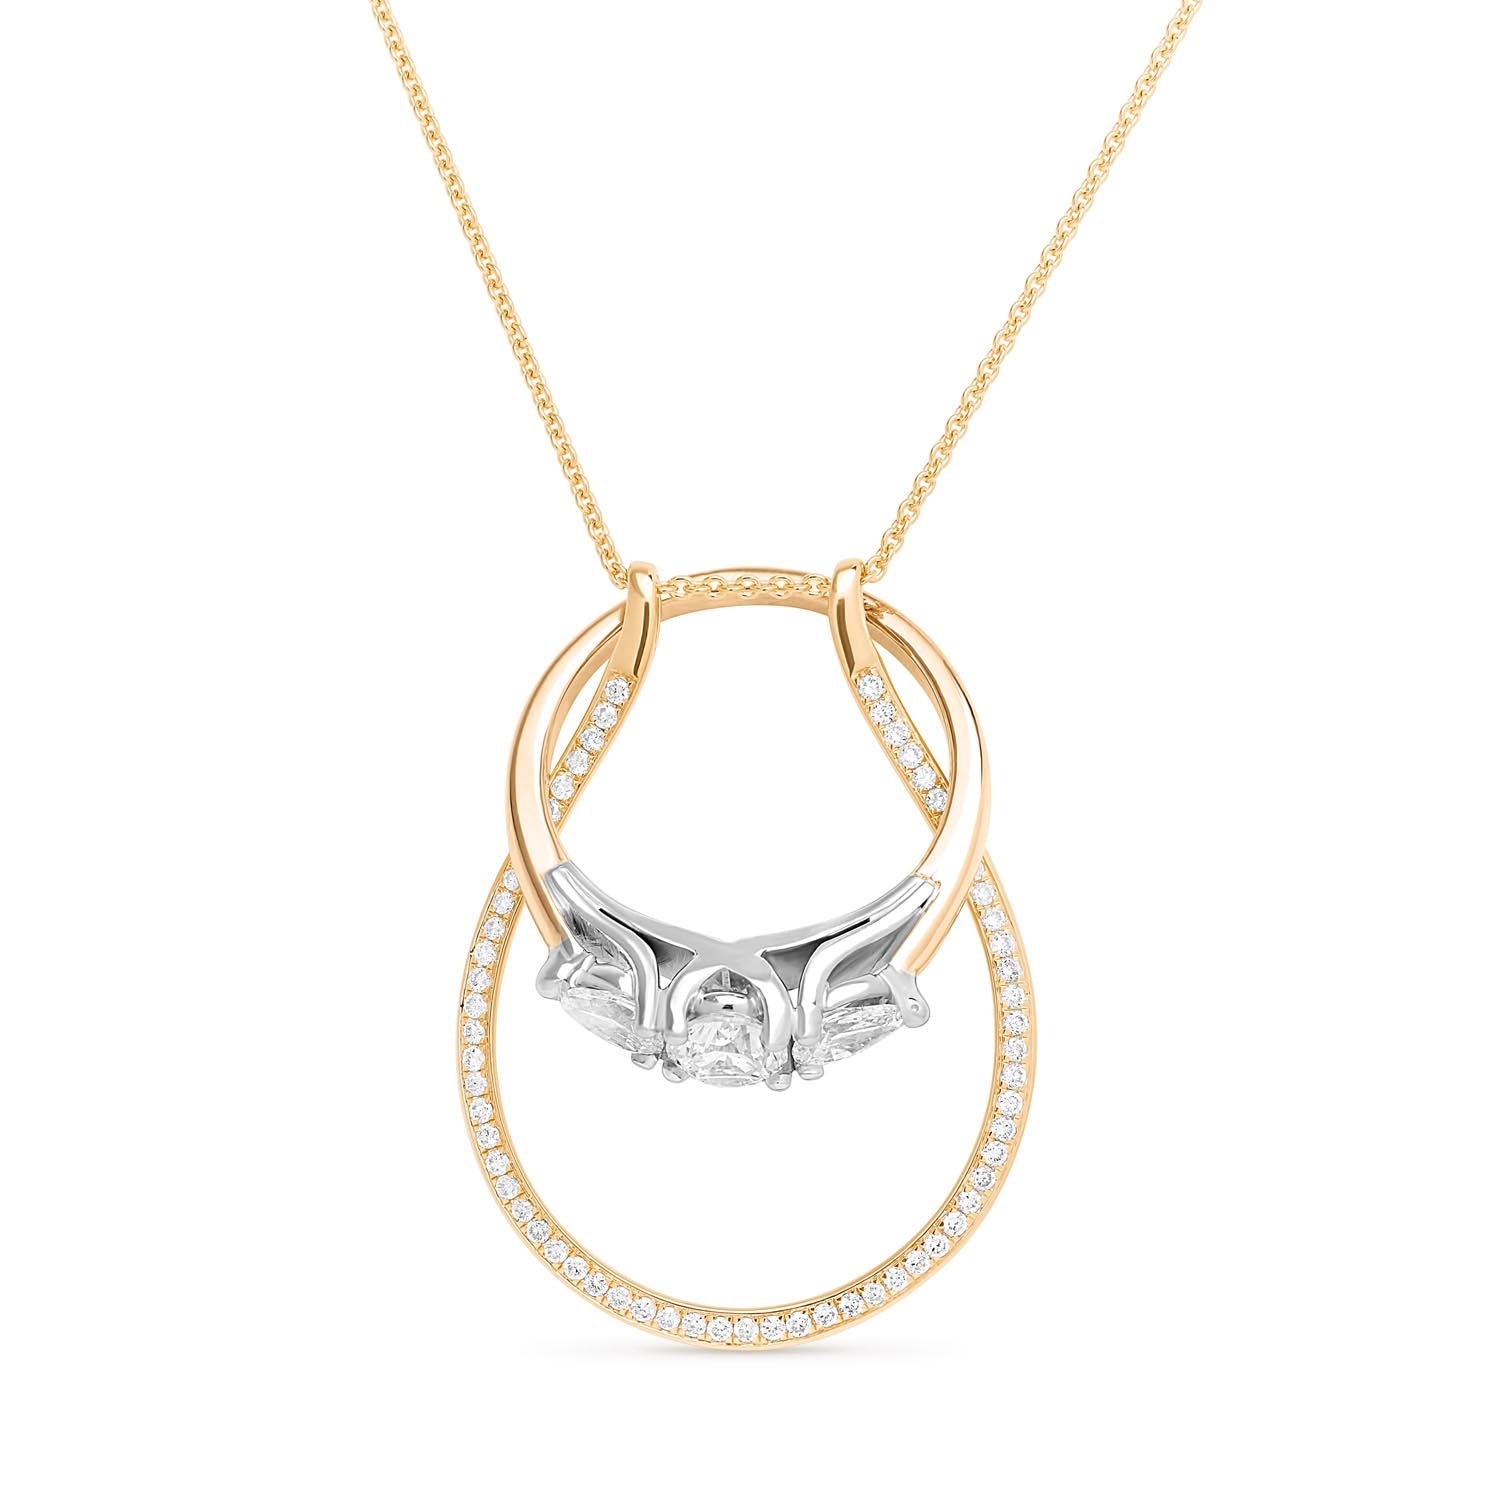 Ring Holder Diamond Necklace - Yellow Gold